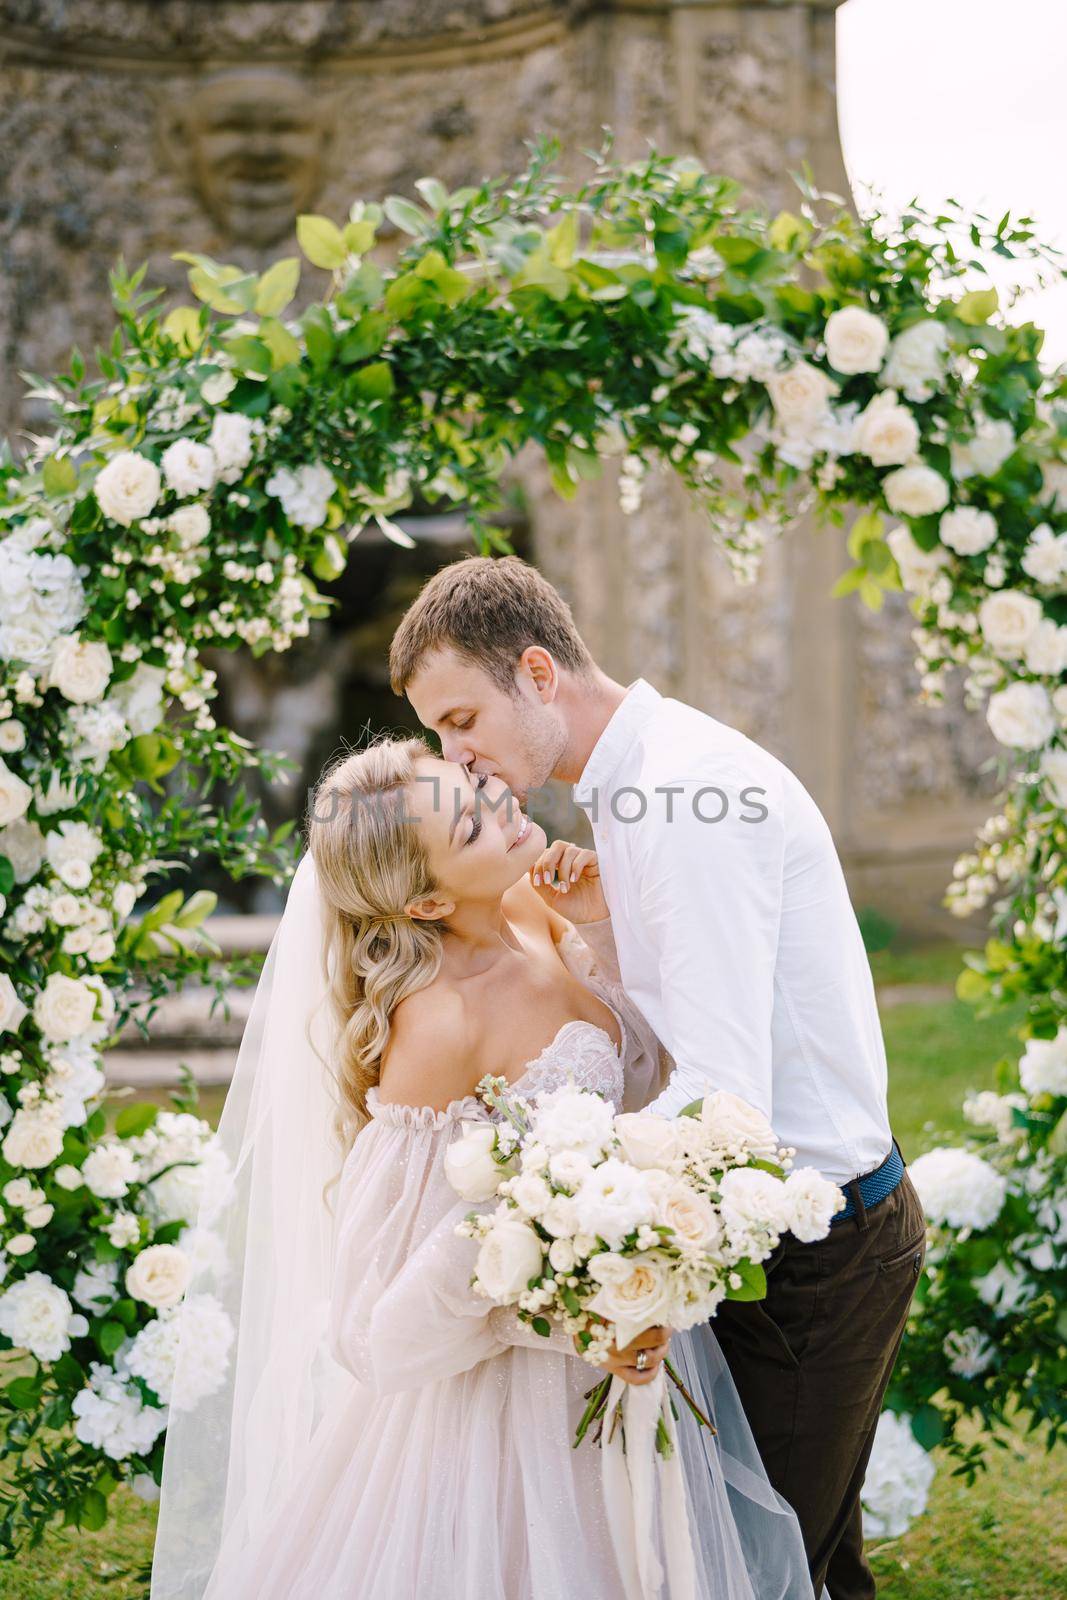 Wedding couple kisses. Wedding at an old winery villa in Tuscany, Italy. Round wedding arch decorated with white flowers and greenery in front of an ancient Italian architecture. by Nadtochiy